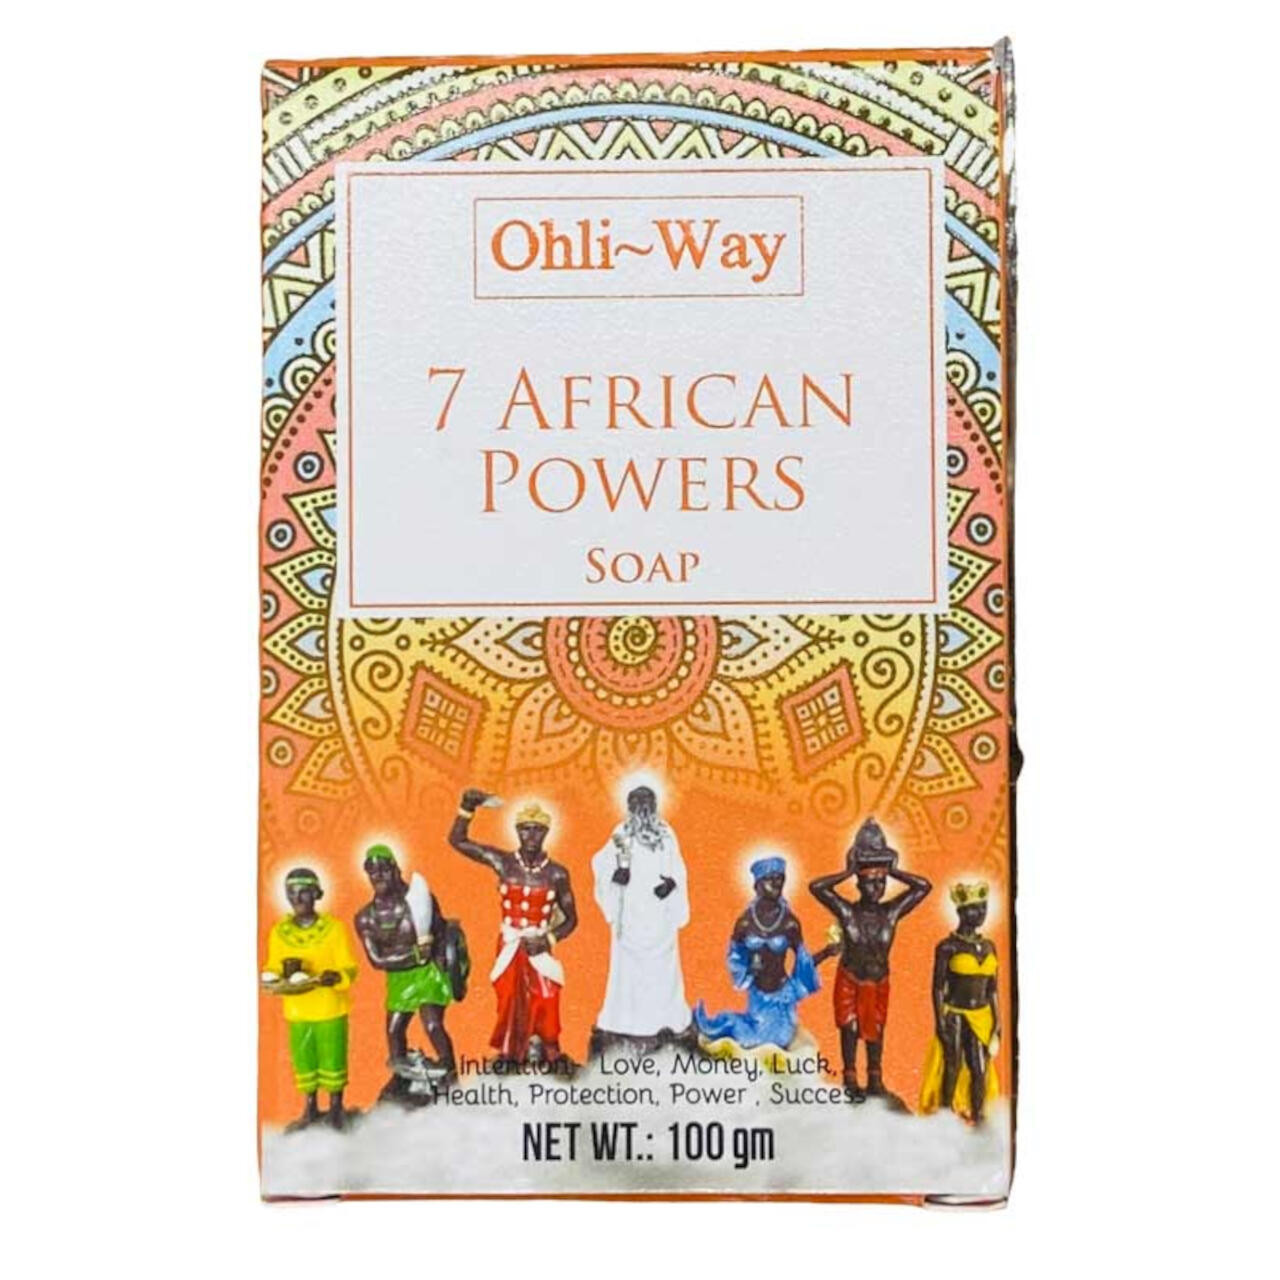 7 African Powers Soap Ohli-Way 100 gm